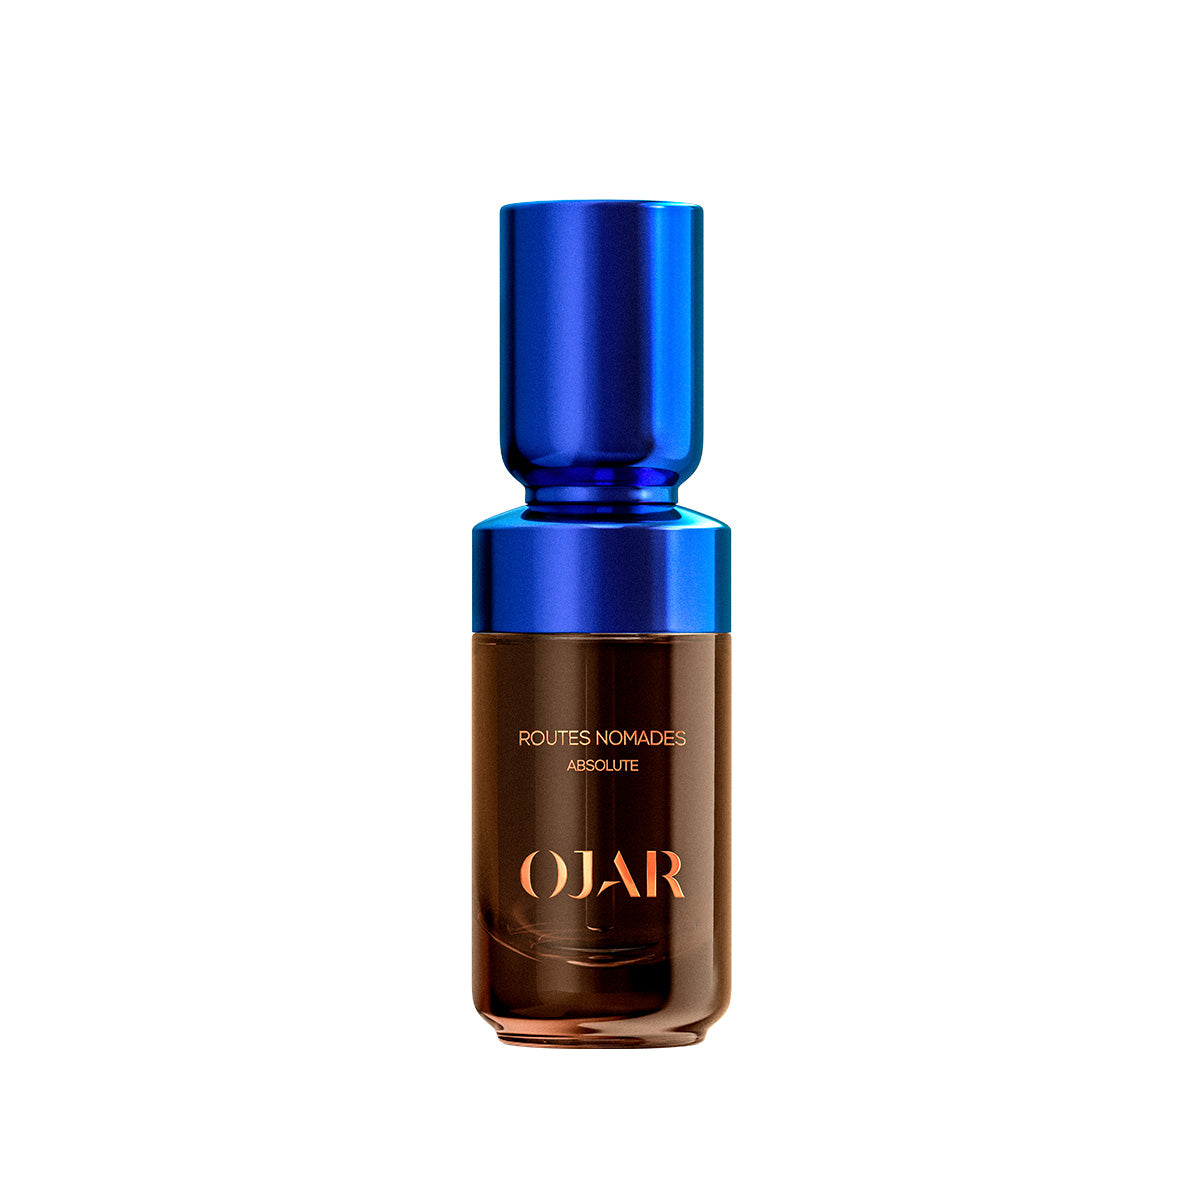 Routes Nomades - OJAR - Absolute 20ml